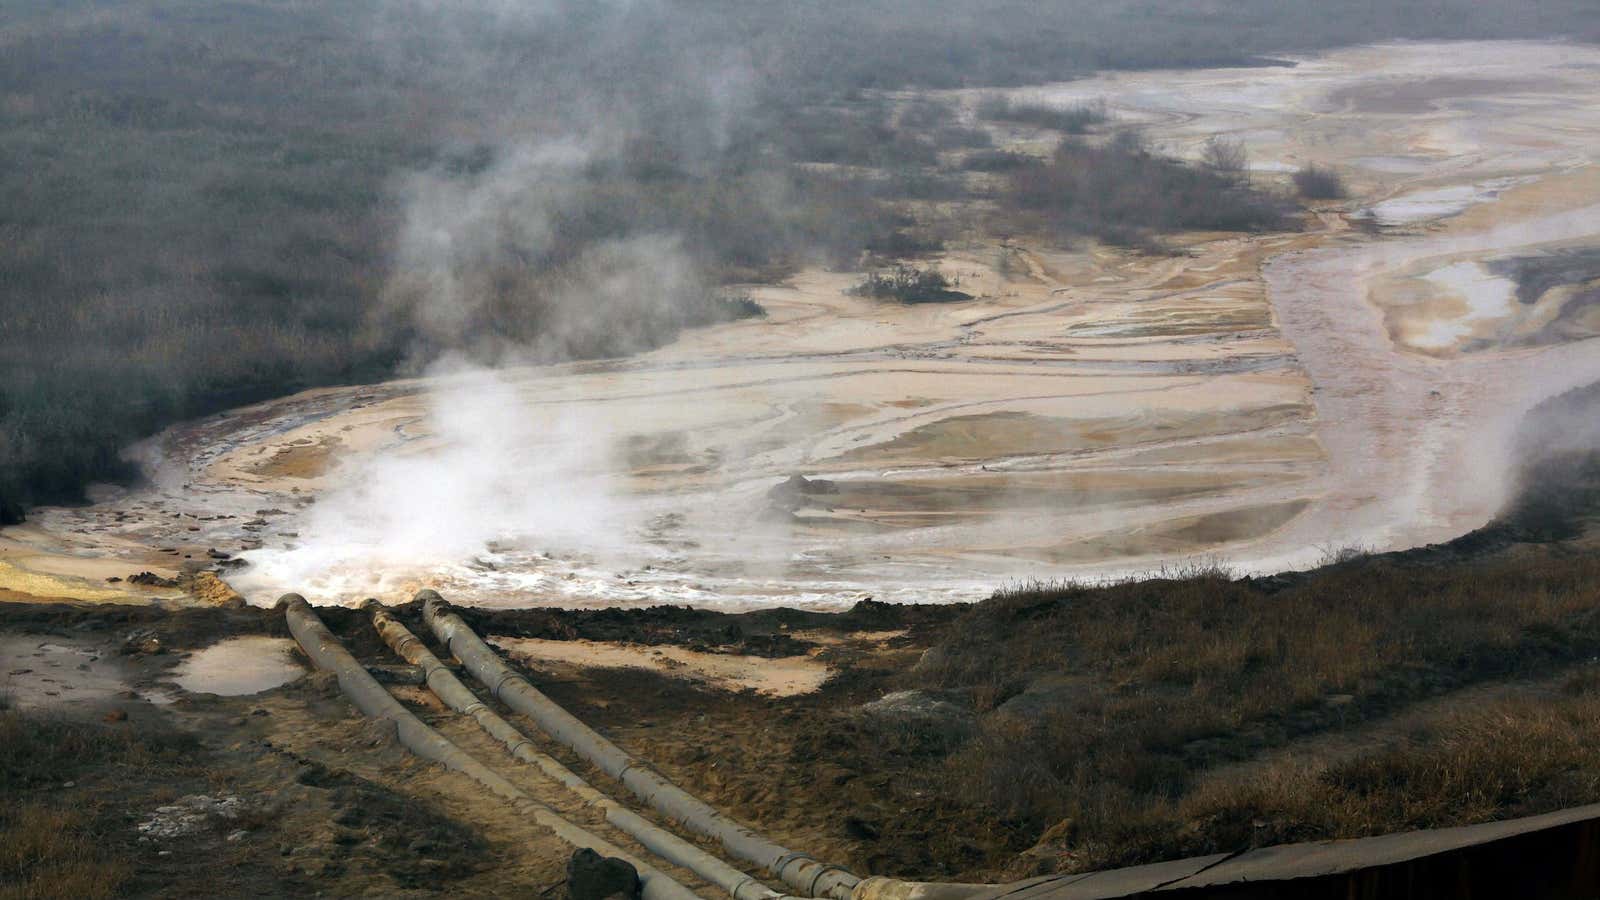 A smelting plant in Inner Mongolia releases wastewater.